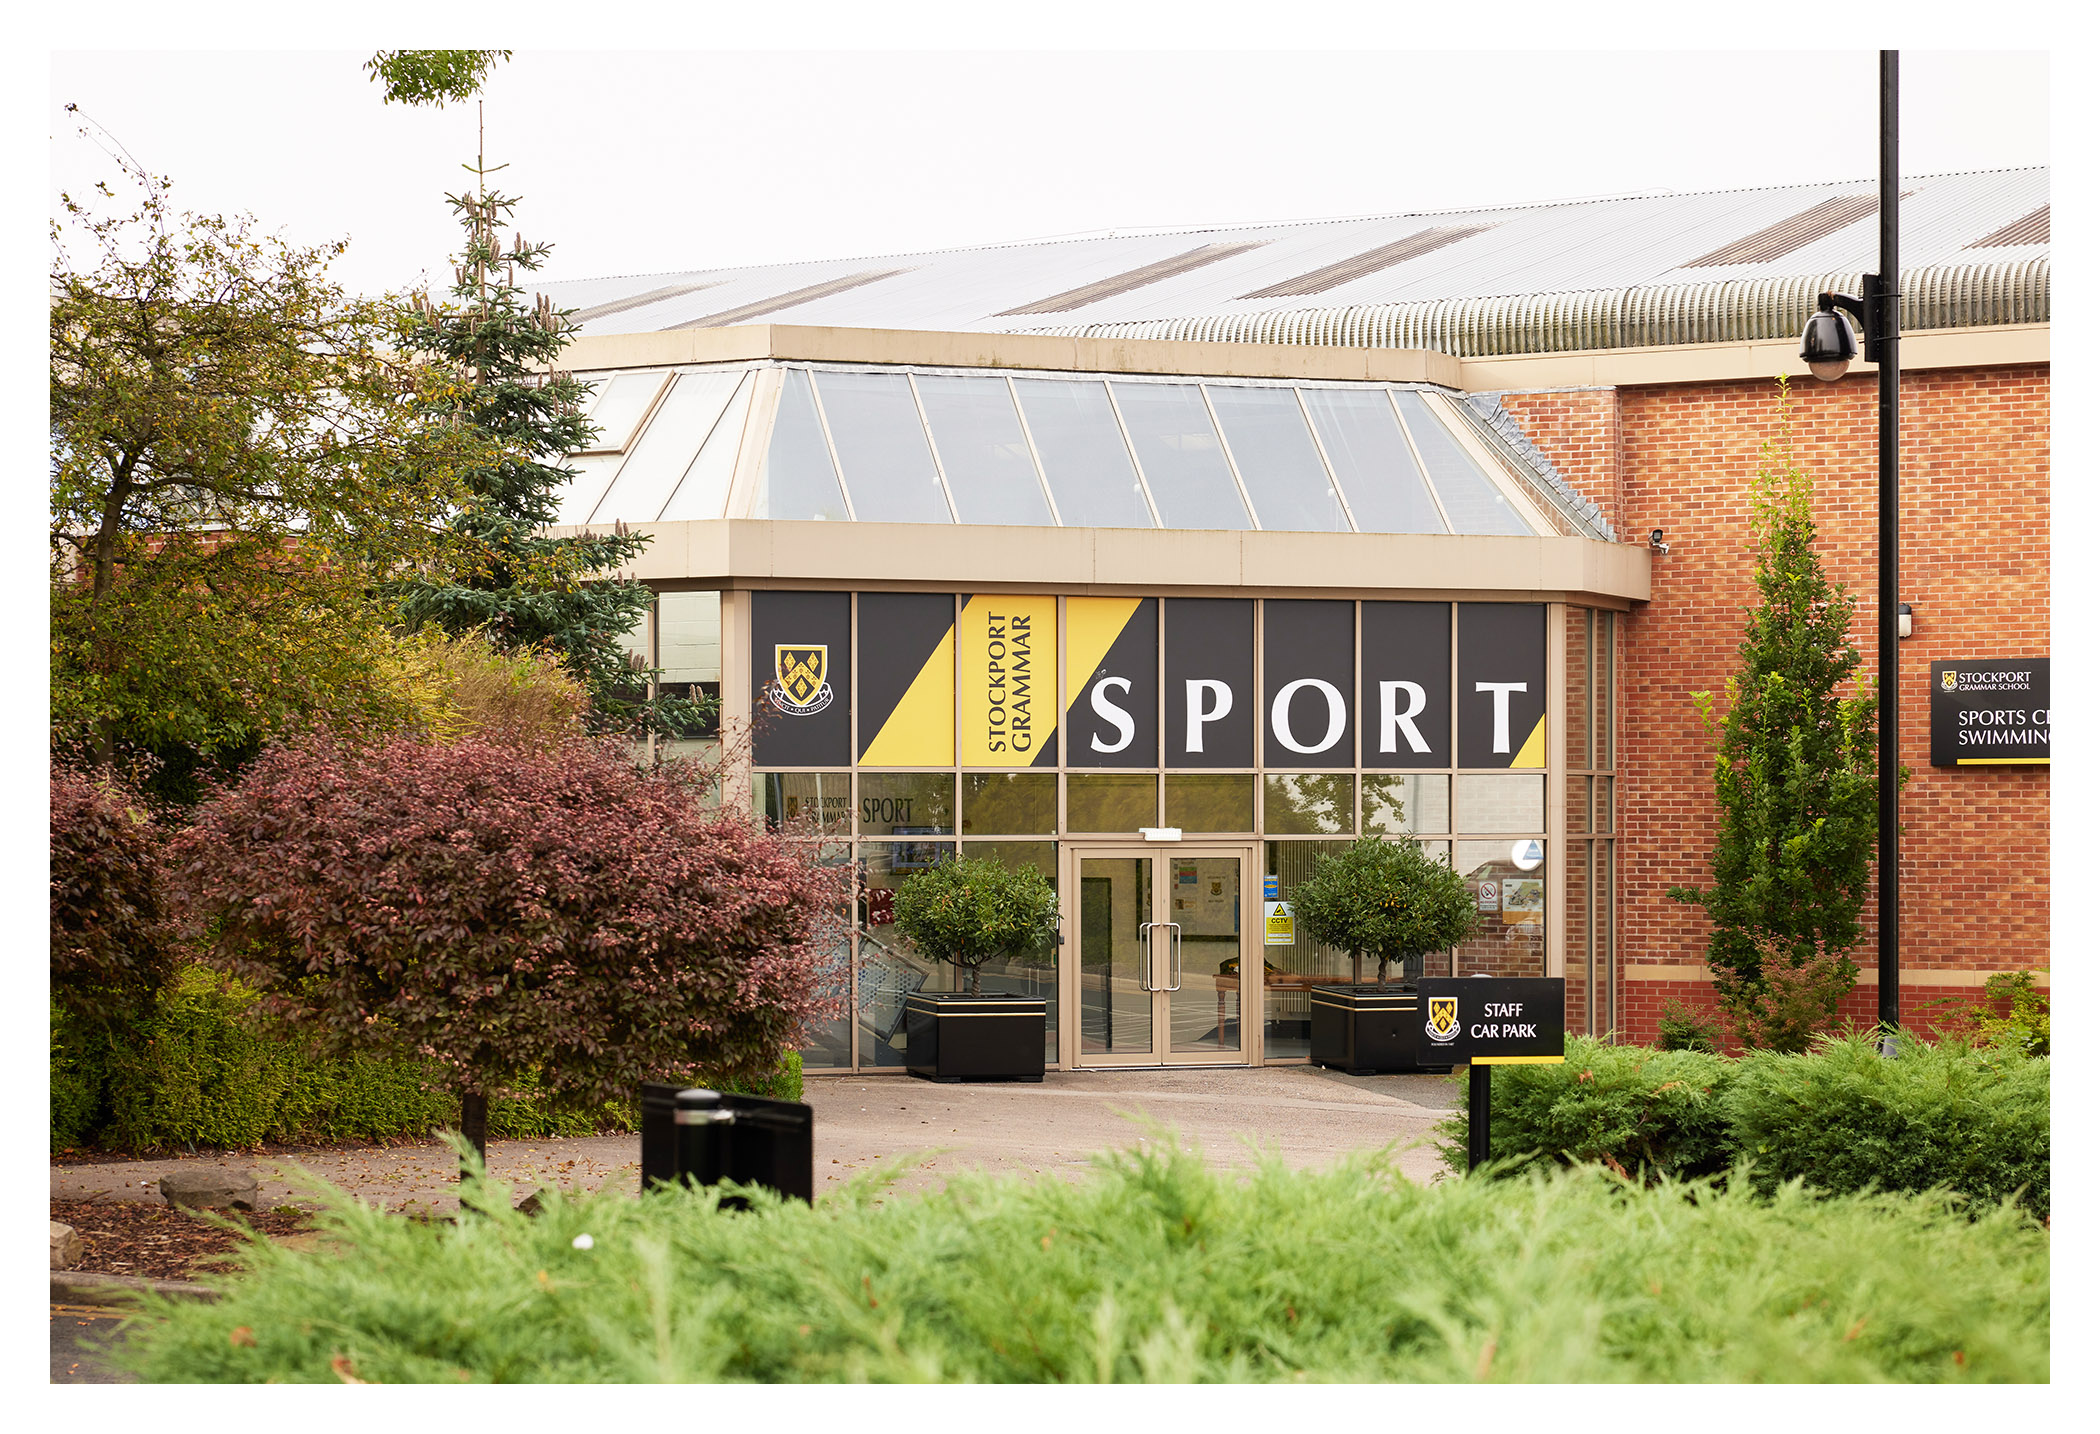 An image of the front of the Sport's Centre